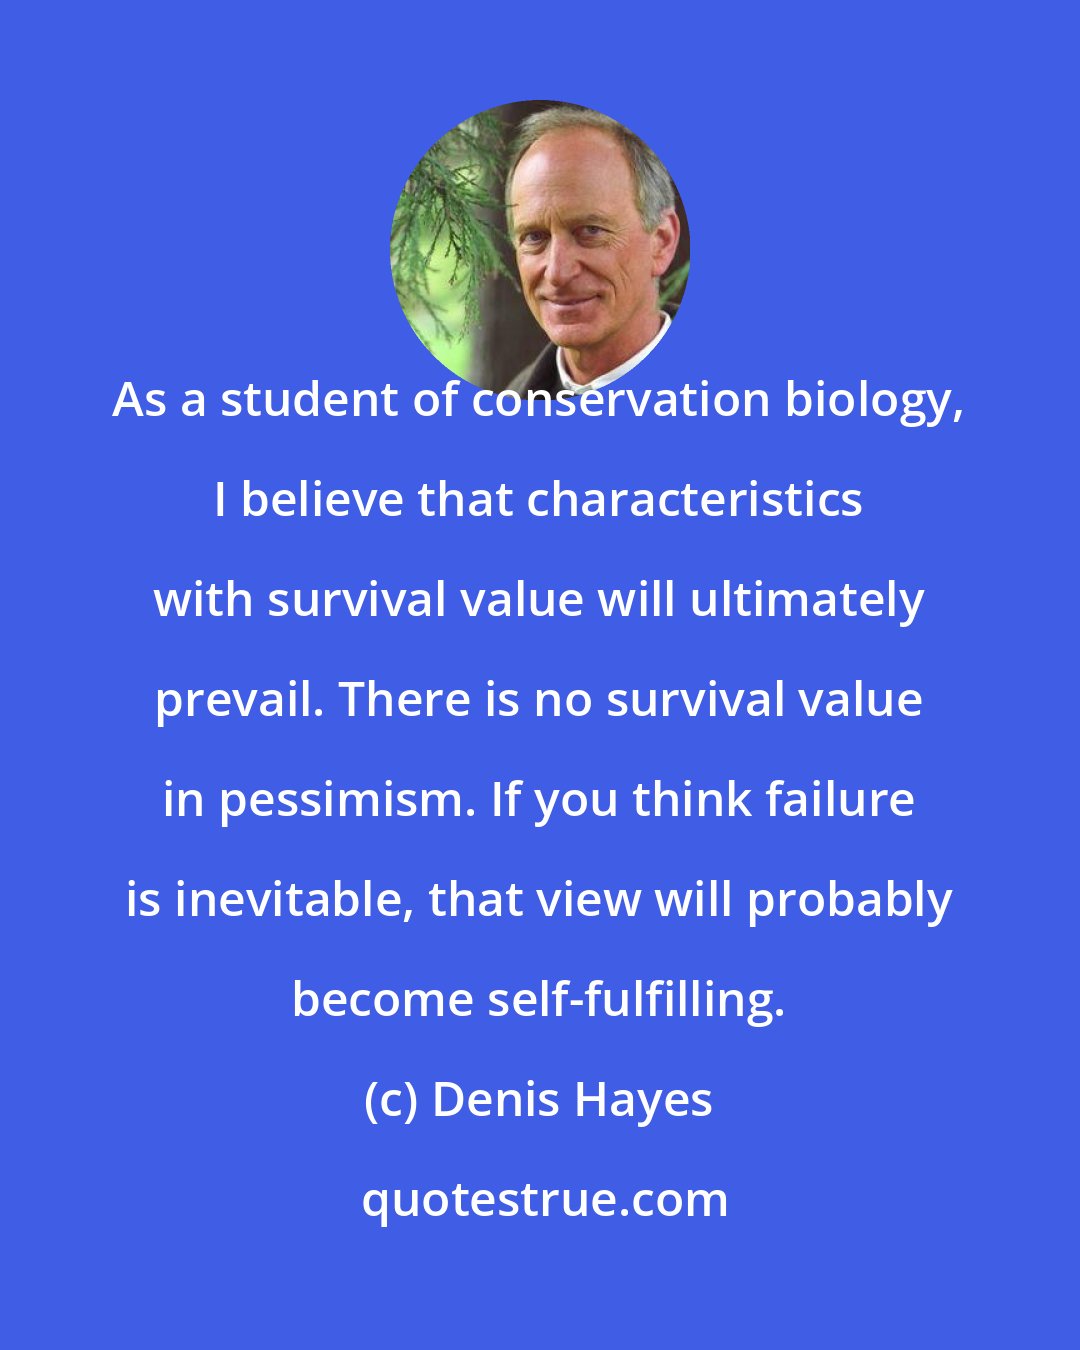 Denis Hayes: As a student of conservation biology, I believe that characteristics with survival value will ultimately prevail. There is no survival value in pessimism. If you think failure is inevitable, that view will probably become self-fulfilling.